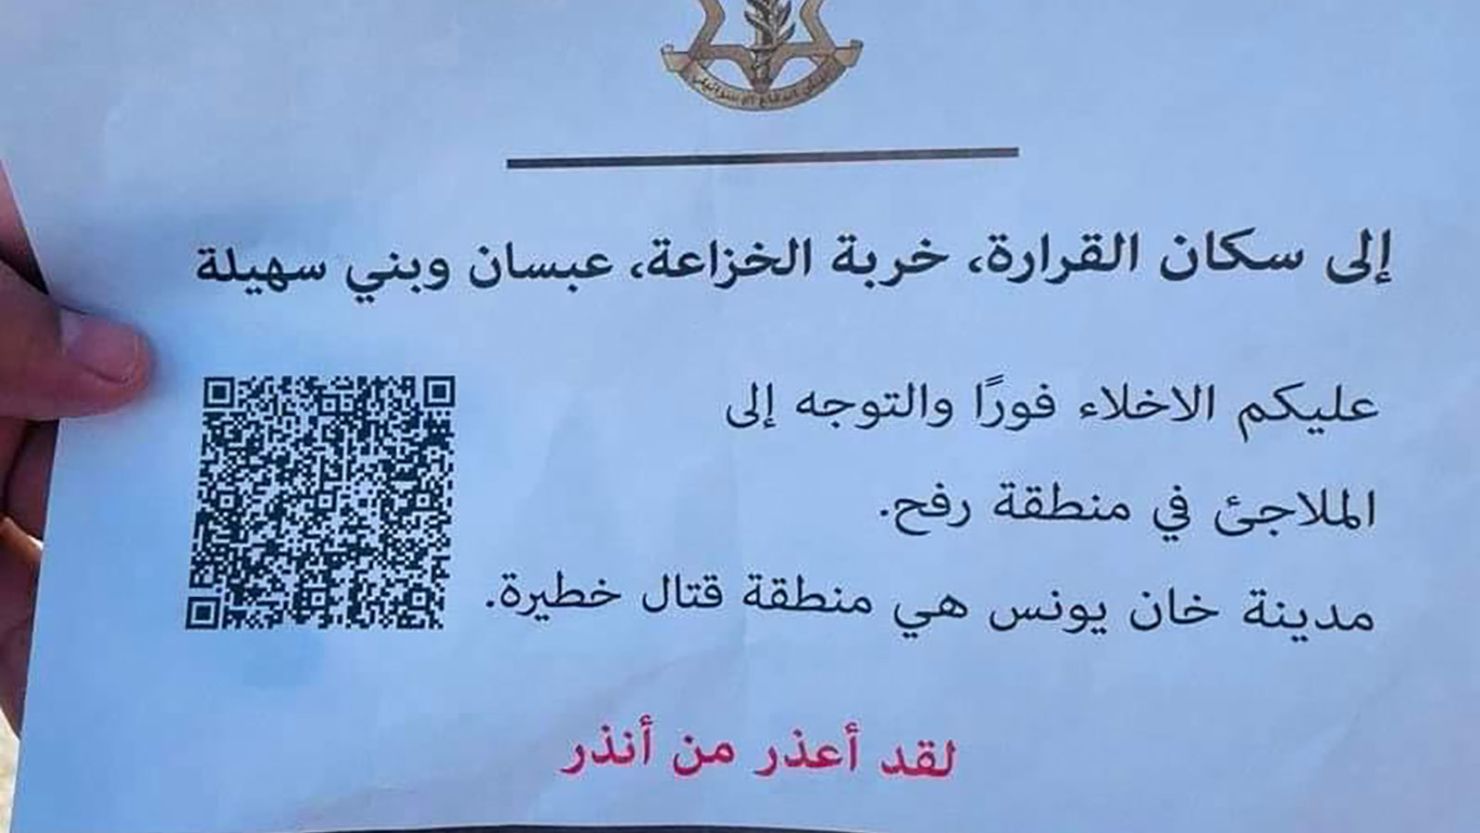 The Israeli military drops leaflets in the southern Gaza city of Khan Younis on December 1, calling it a “fighting zone.”